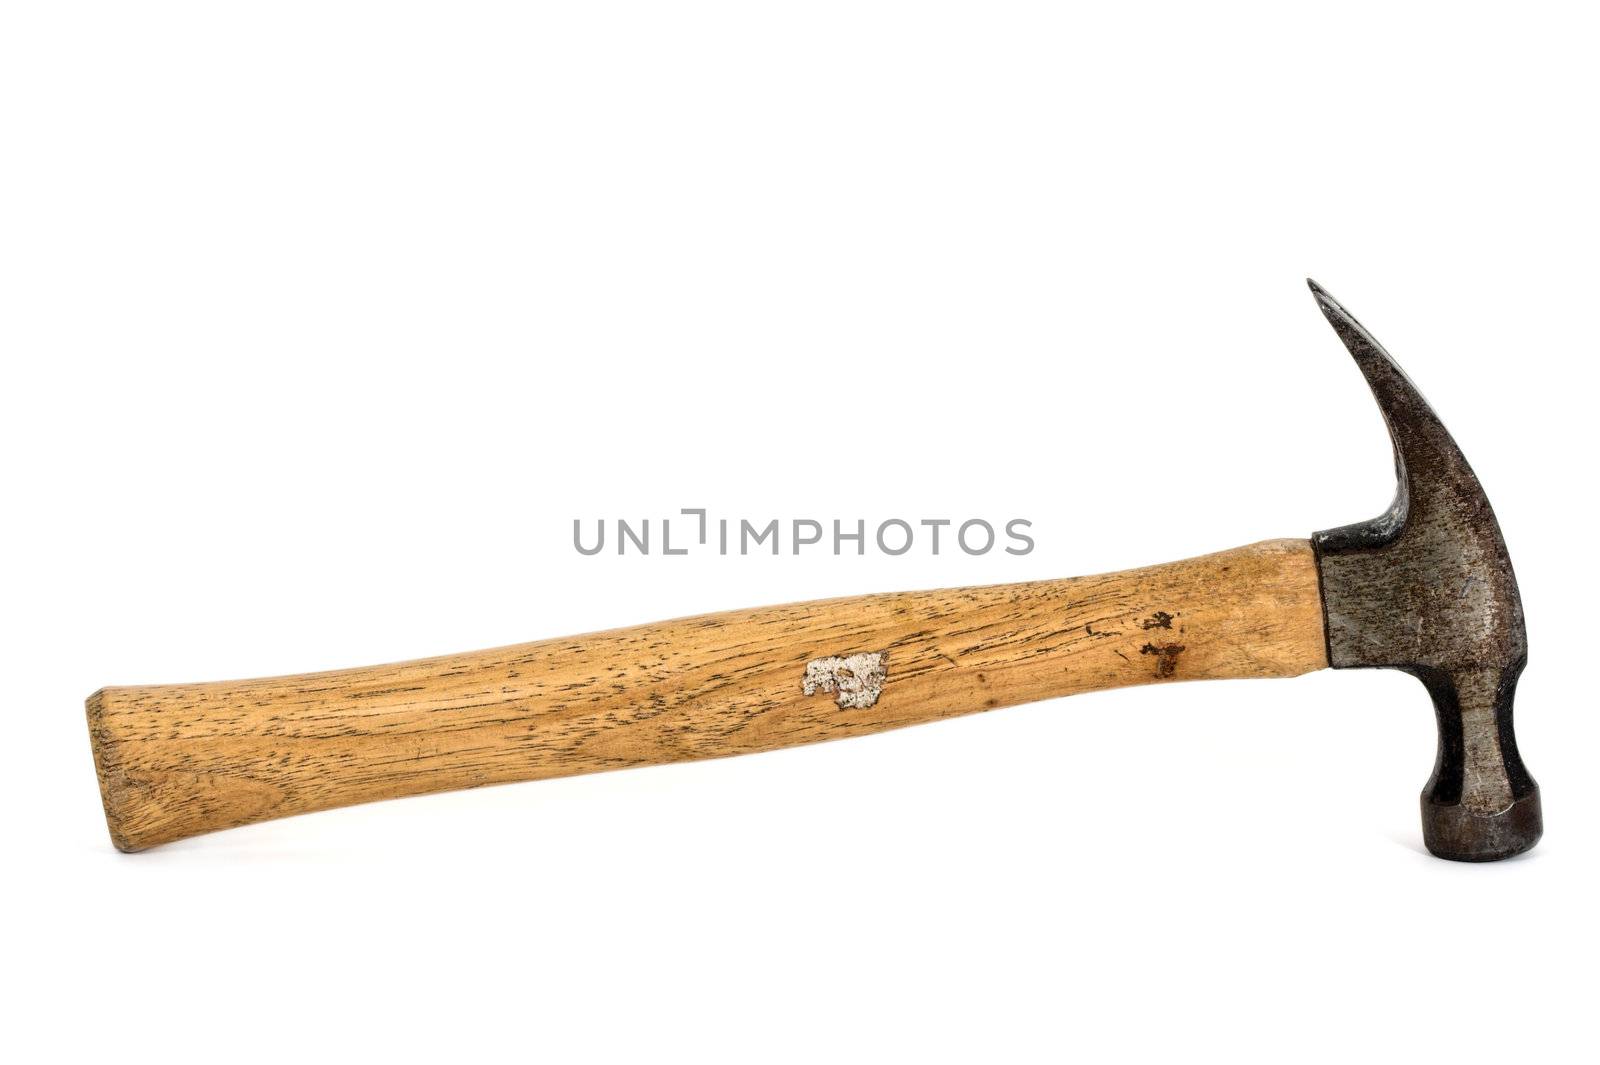 An old hammer isolated on a white background